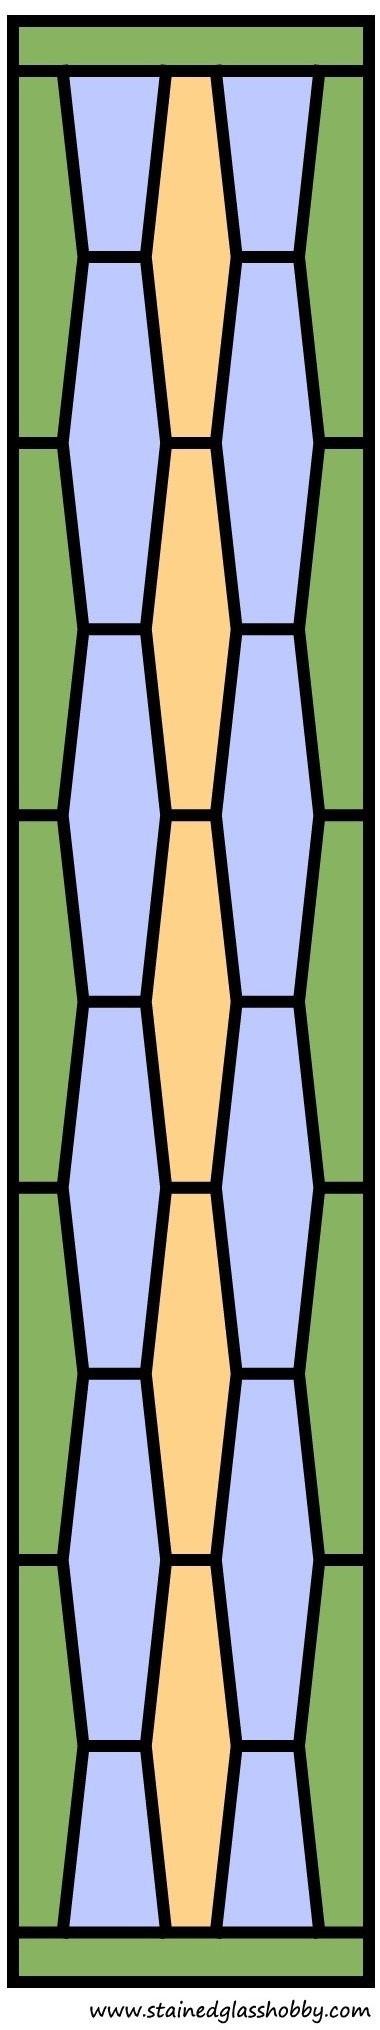 Color door panel stained glass design